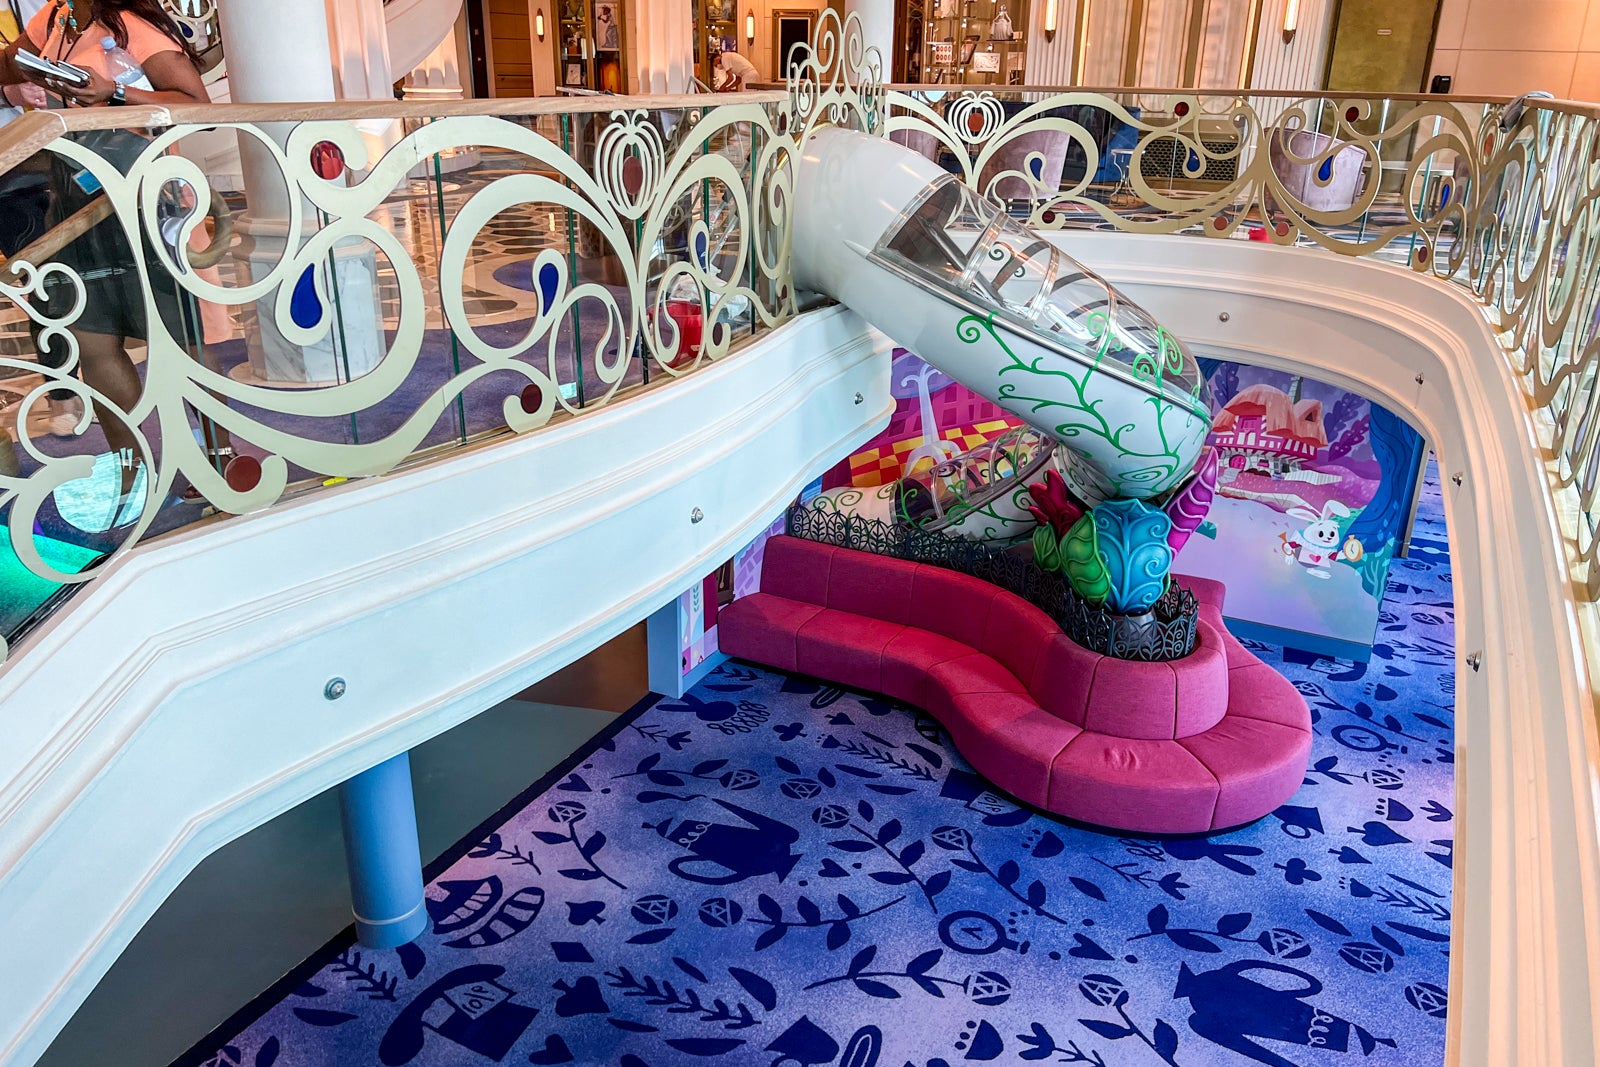 best disney cruise ship for 8 year old